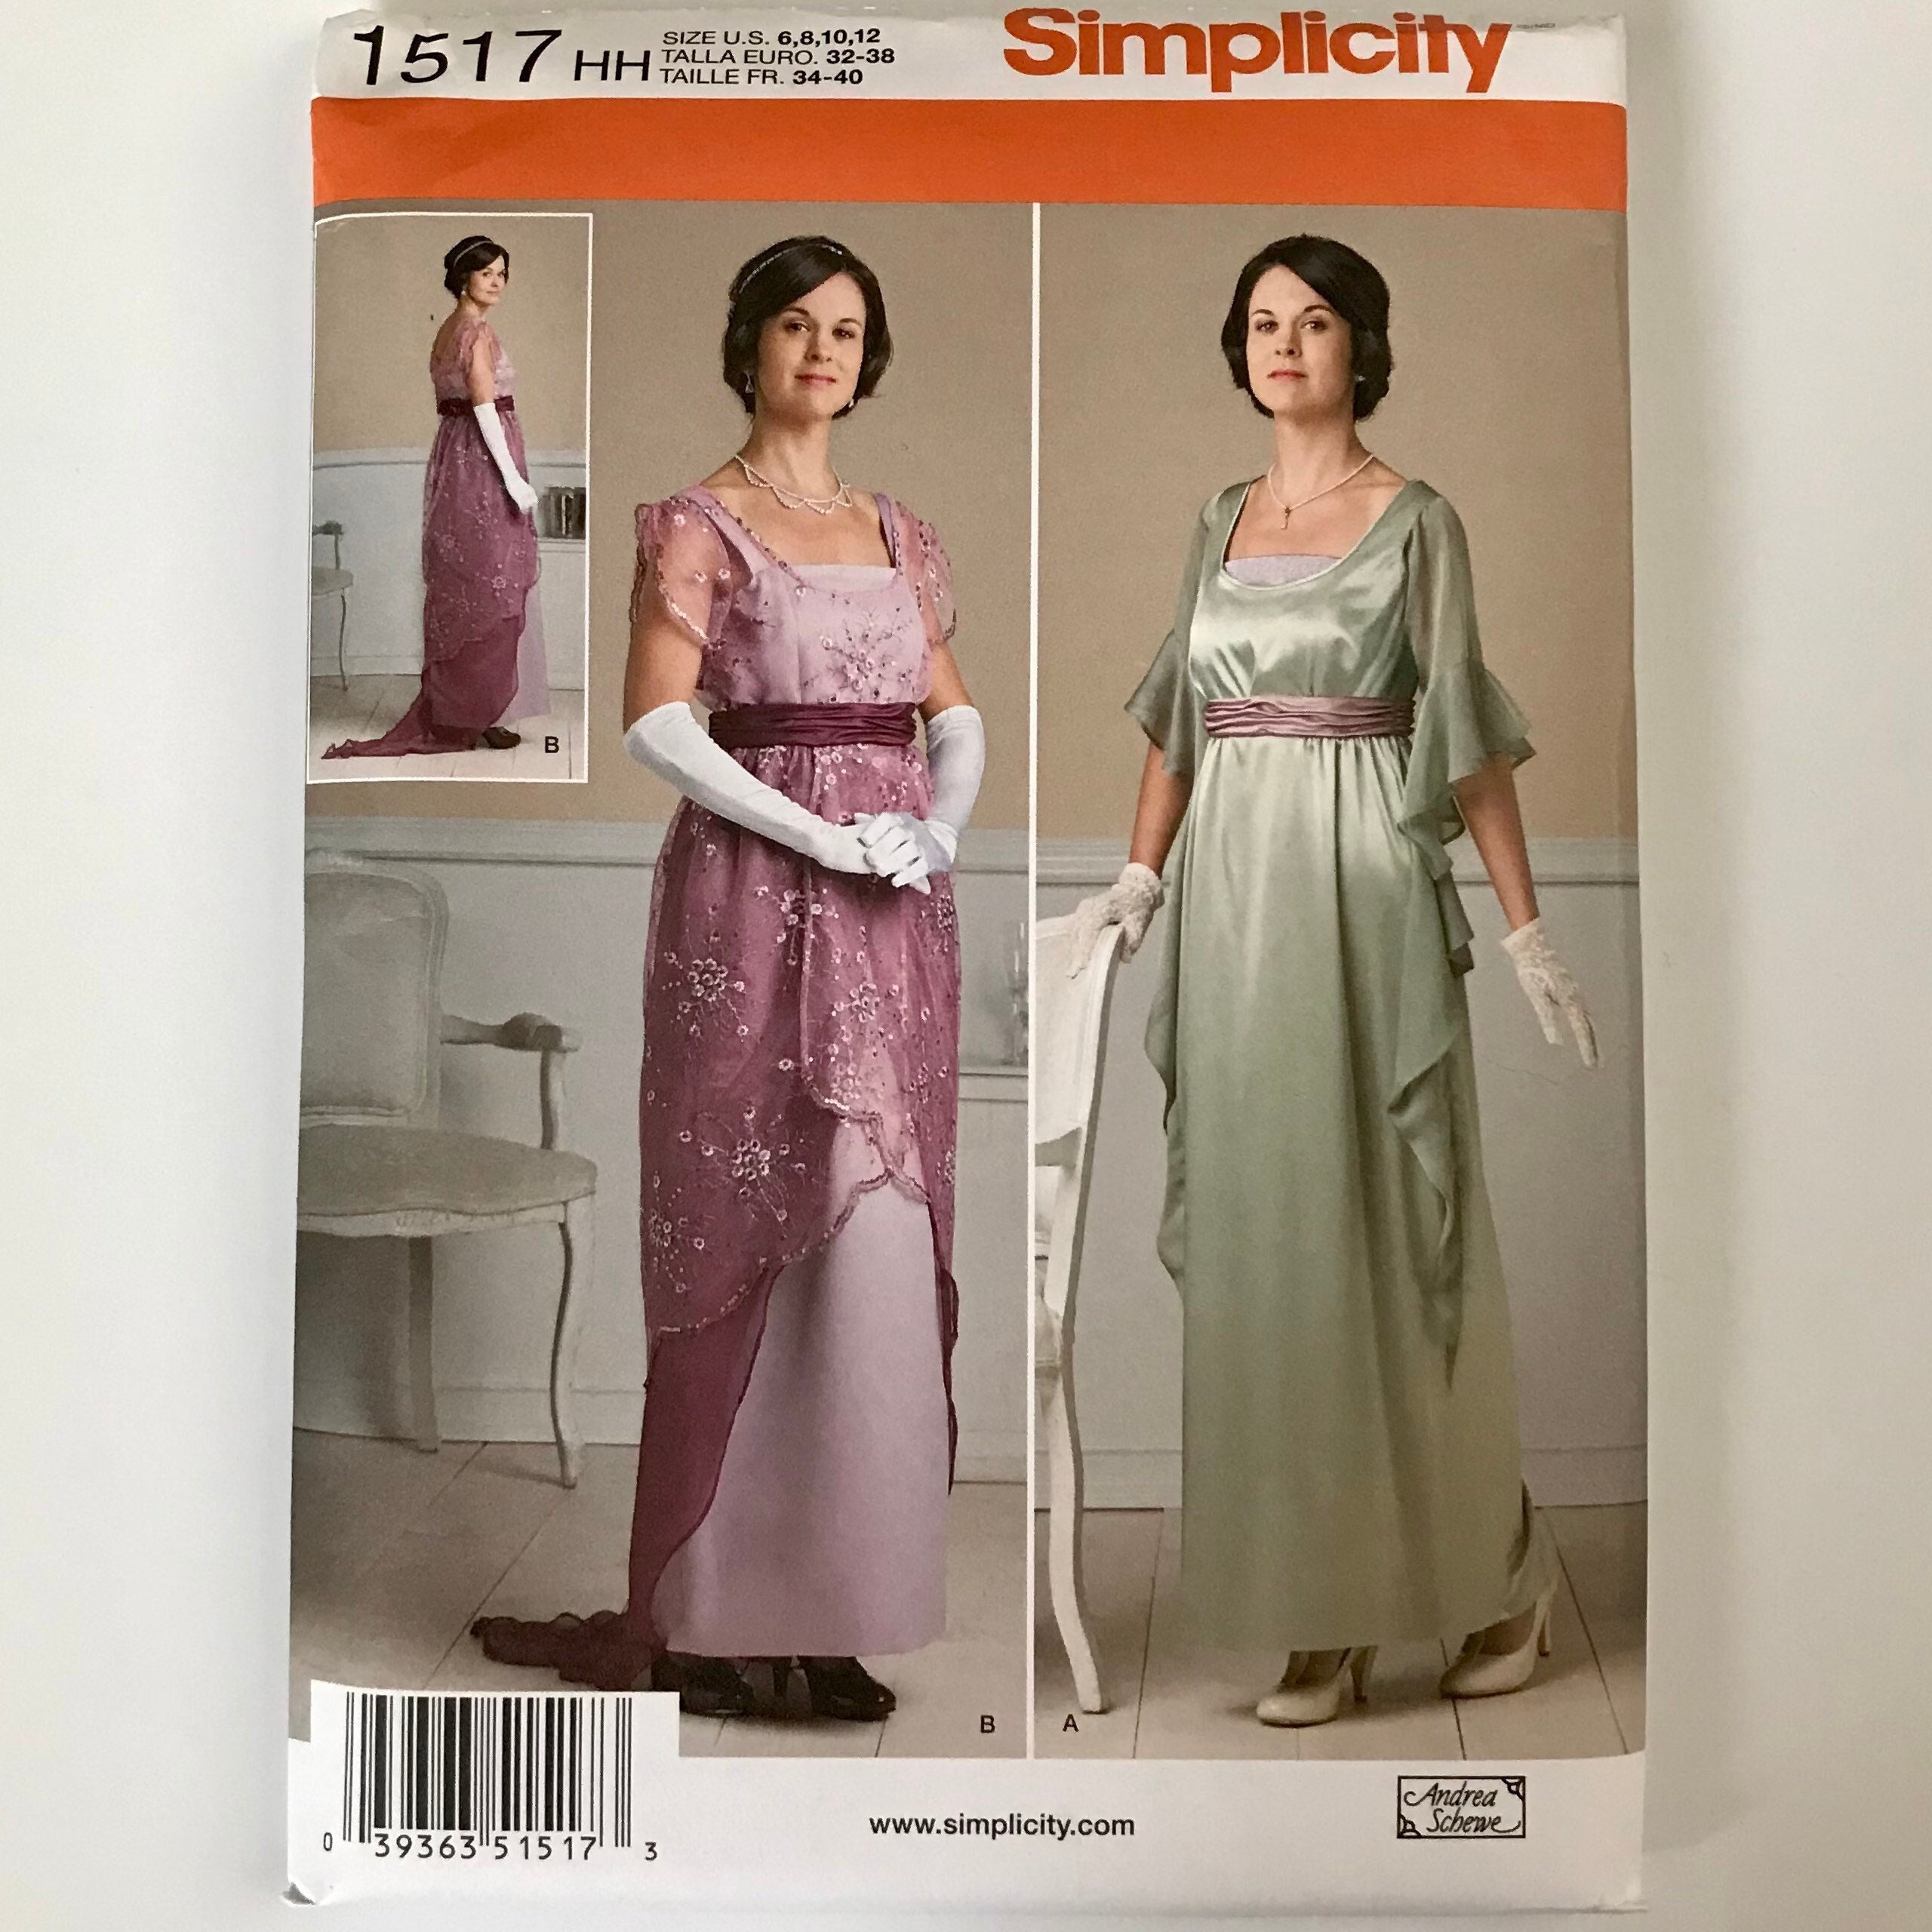 200+ FREE Dress Patterns for Women {Many Easy Styles}